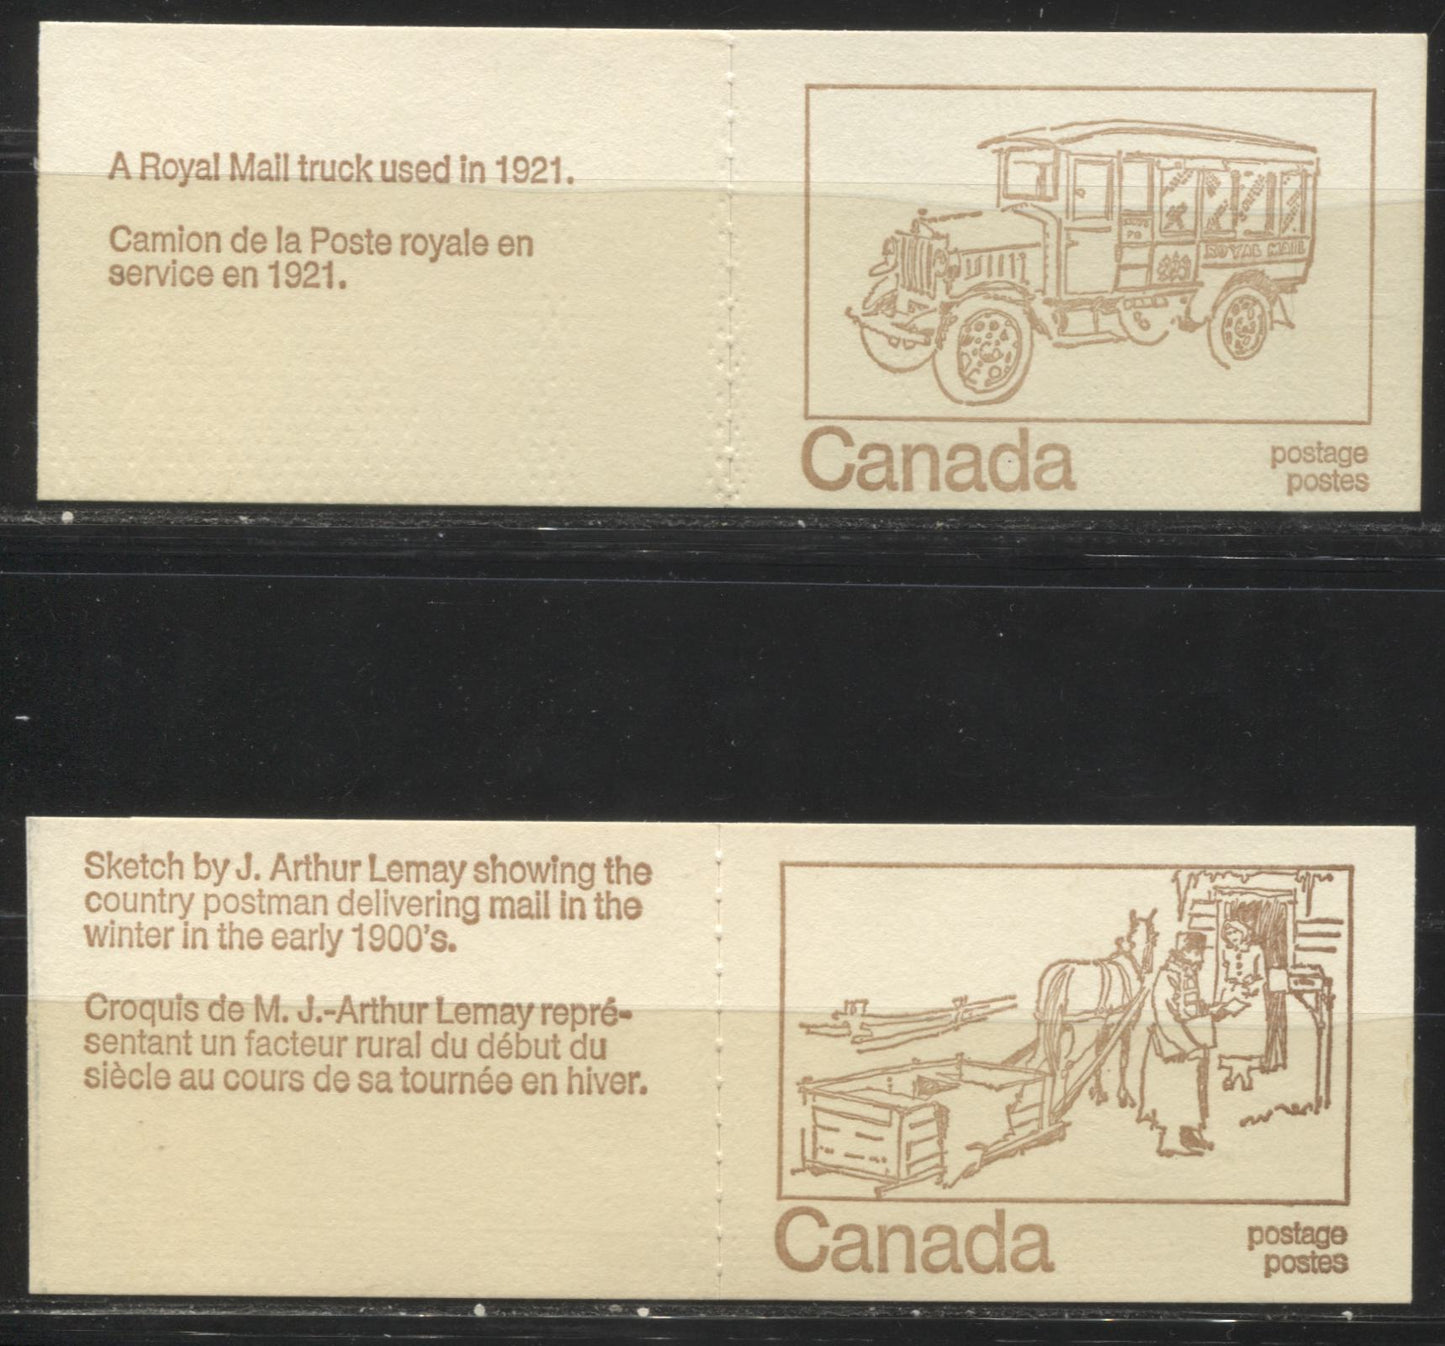 Lot #82 Canada McCann #BK69ag-ah 1c Purple Brown, 6c Black, And 8c Slate, 1967-1973 Centennial Issue, A Specialized Lot of Two 25c Booklets, Type 3 Covers Black Sealing Strip, HF-fl and MF-fl Paper, Settings C & B, OP-4 Tagging With 20 mm Spacing